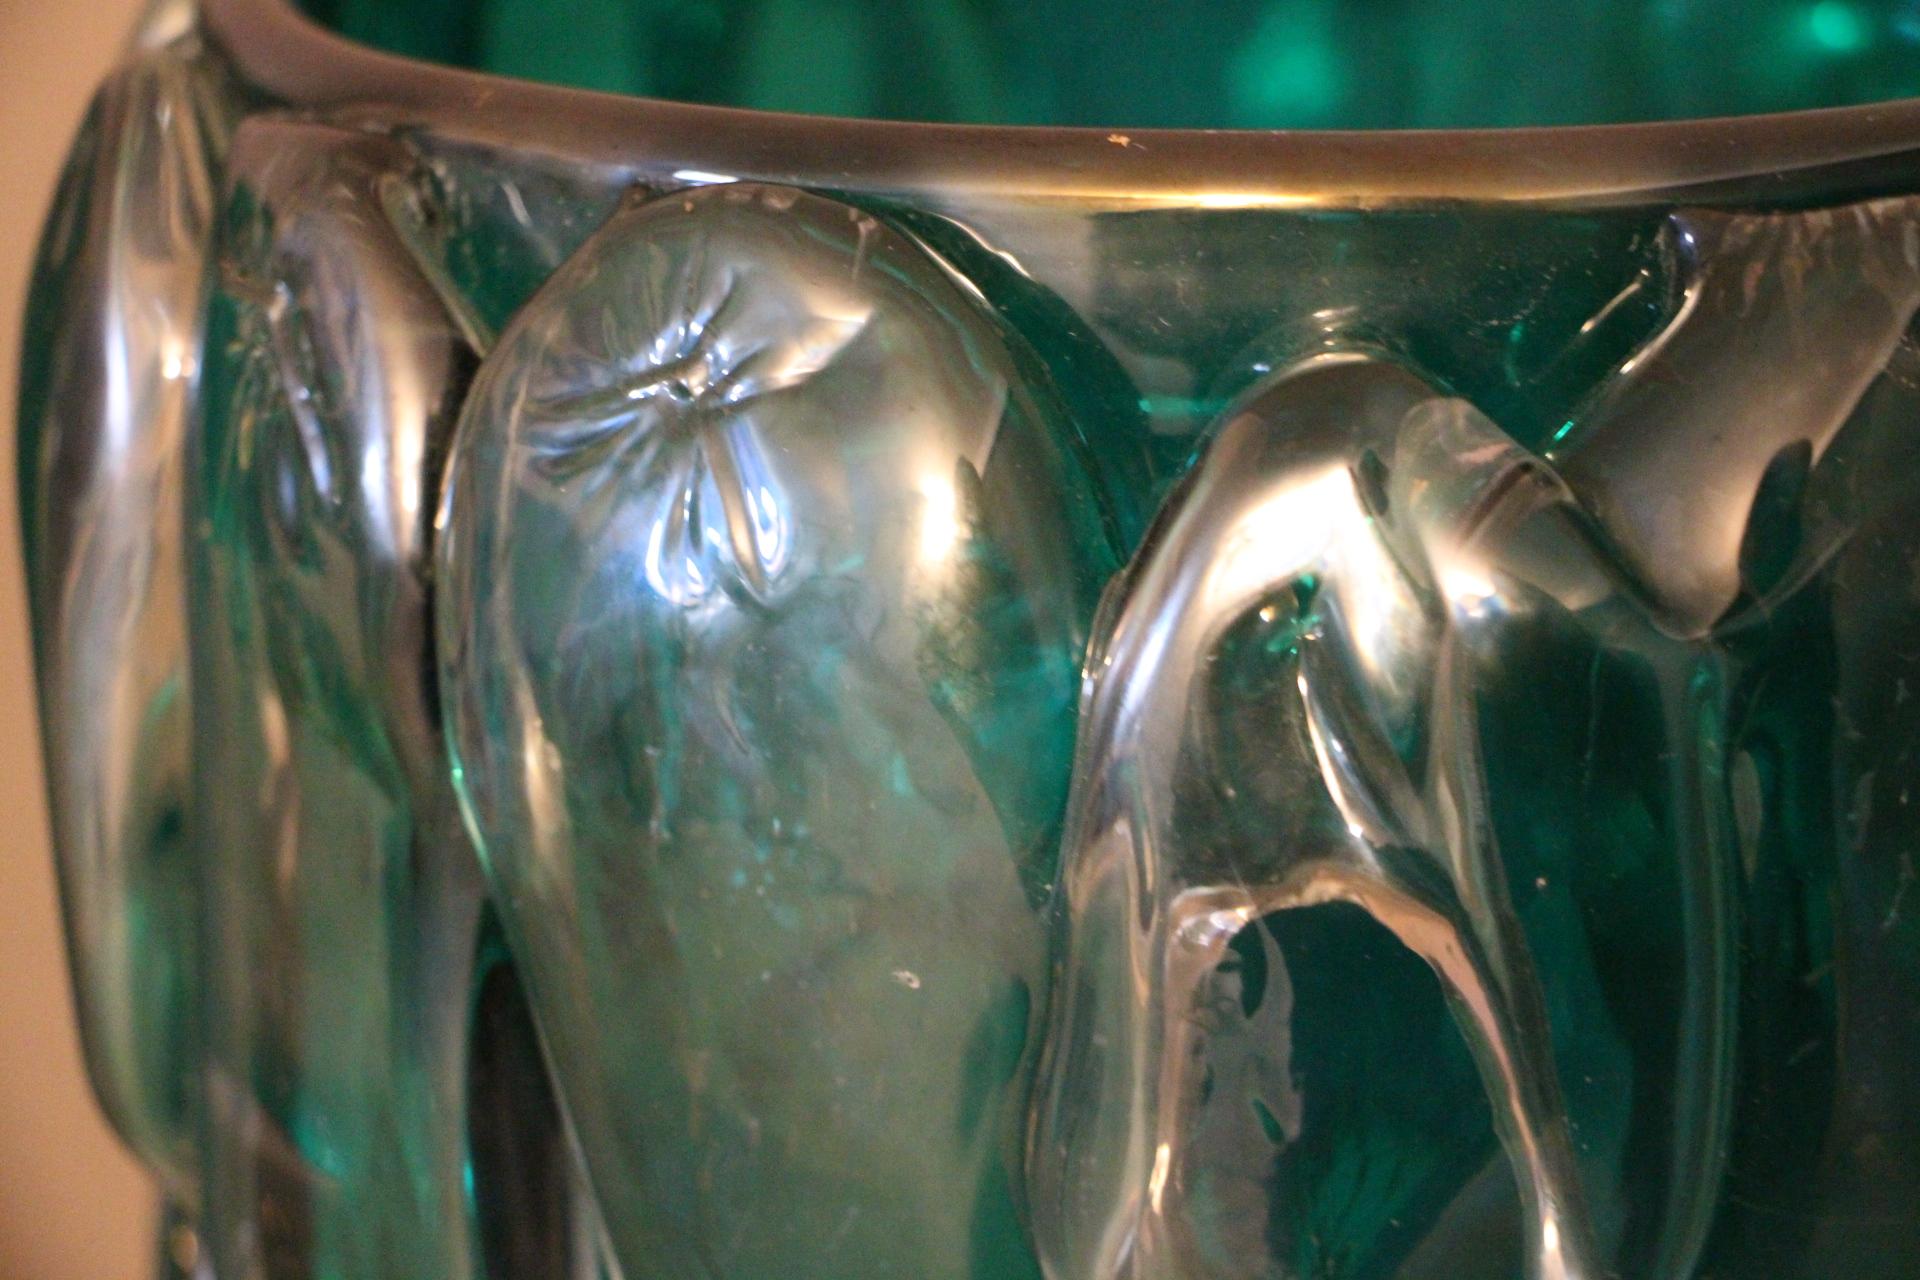 Pair of Large Emerald Green Color and Iridescent Murano Glass Vases by Cenedese 5